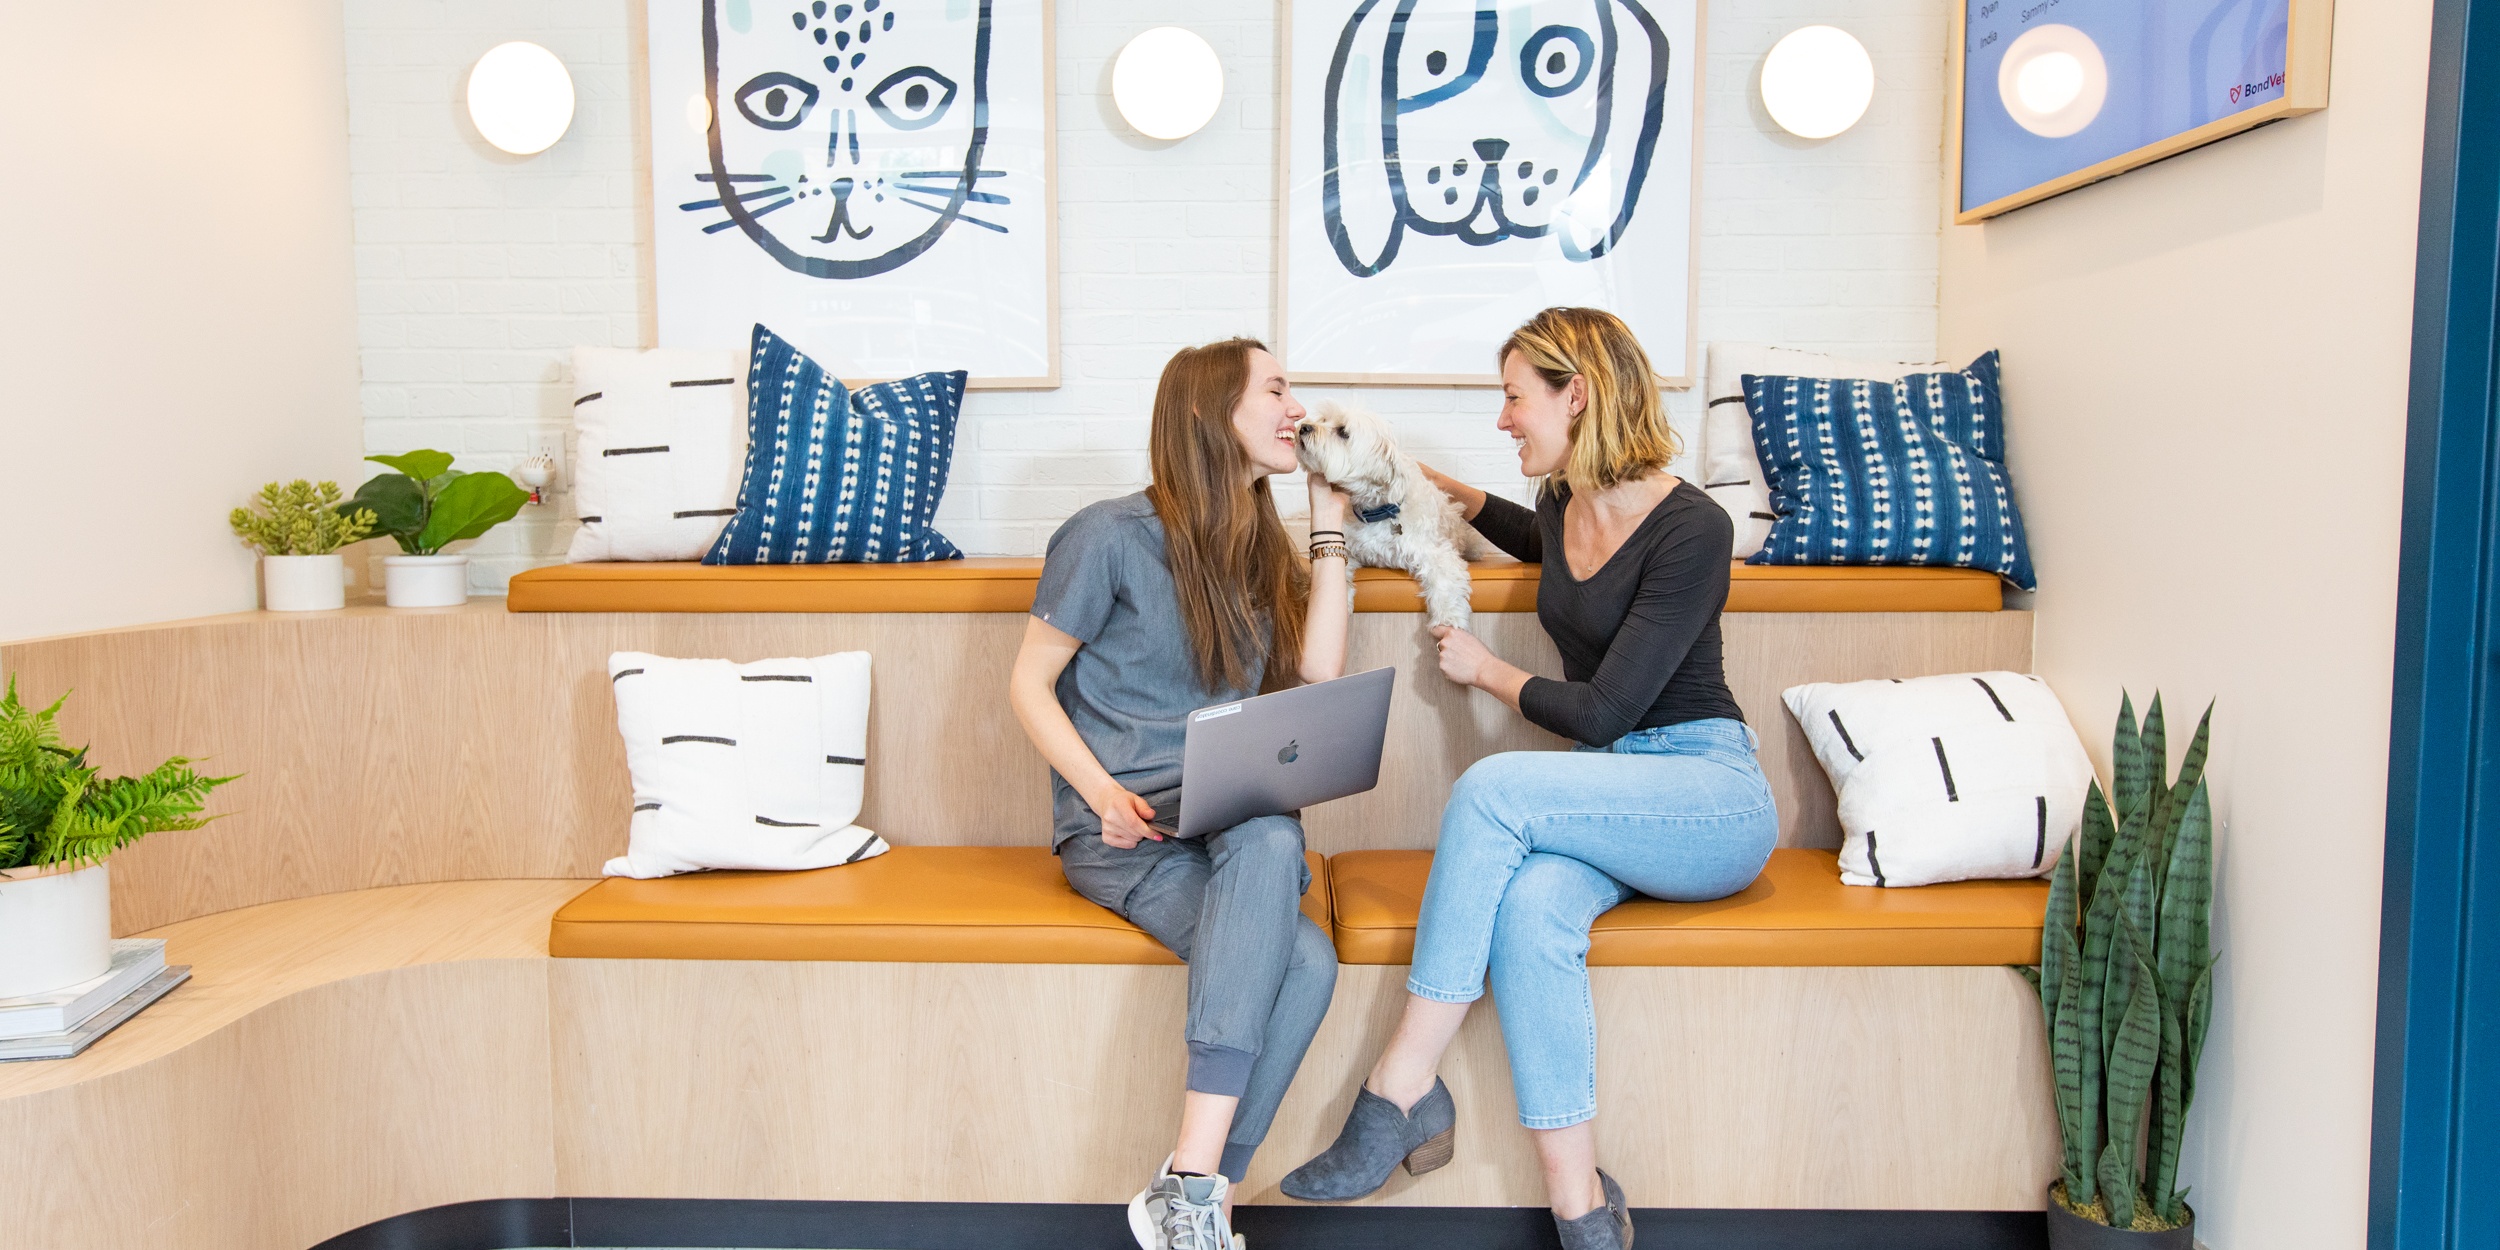 Two women seated in a modern cafe setting with pet-themed decor, engaging in conversation while one holds a laptop.